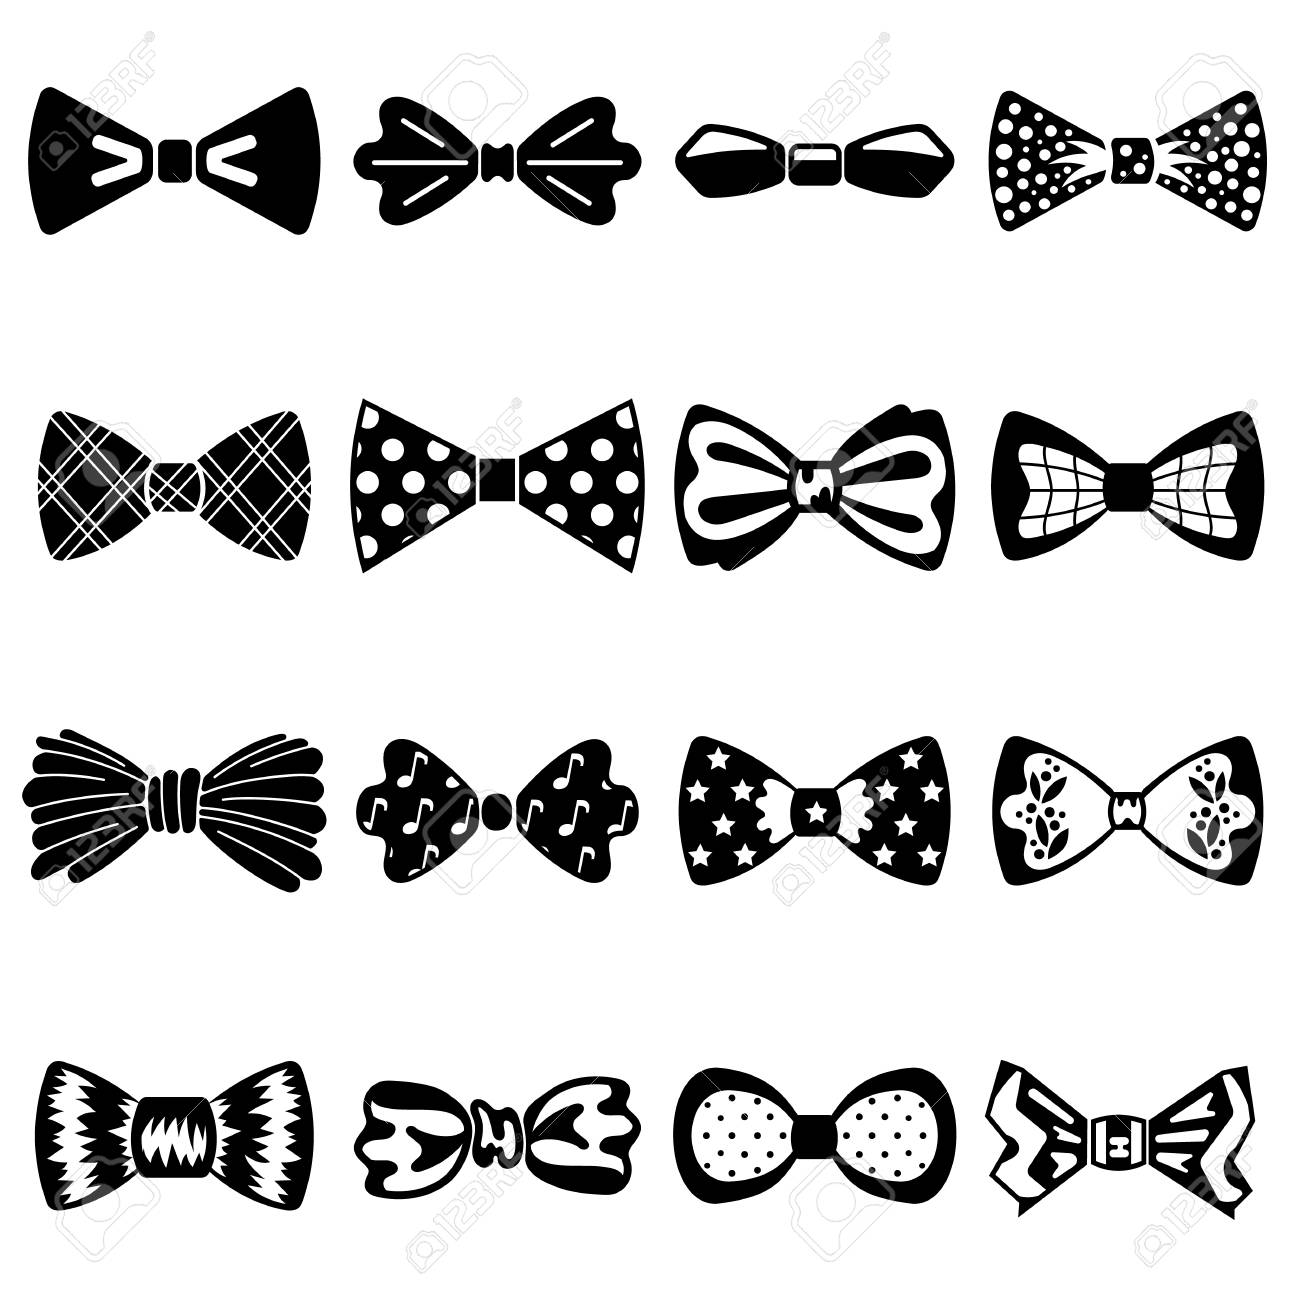 Free download Bowtie Icons Set Simple Set Of Bowtie Vector Icons For ...